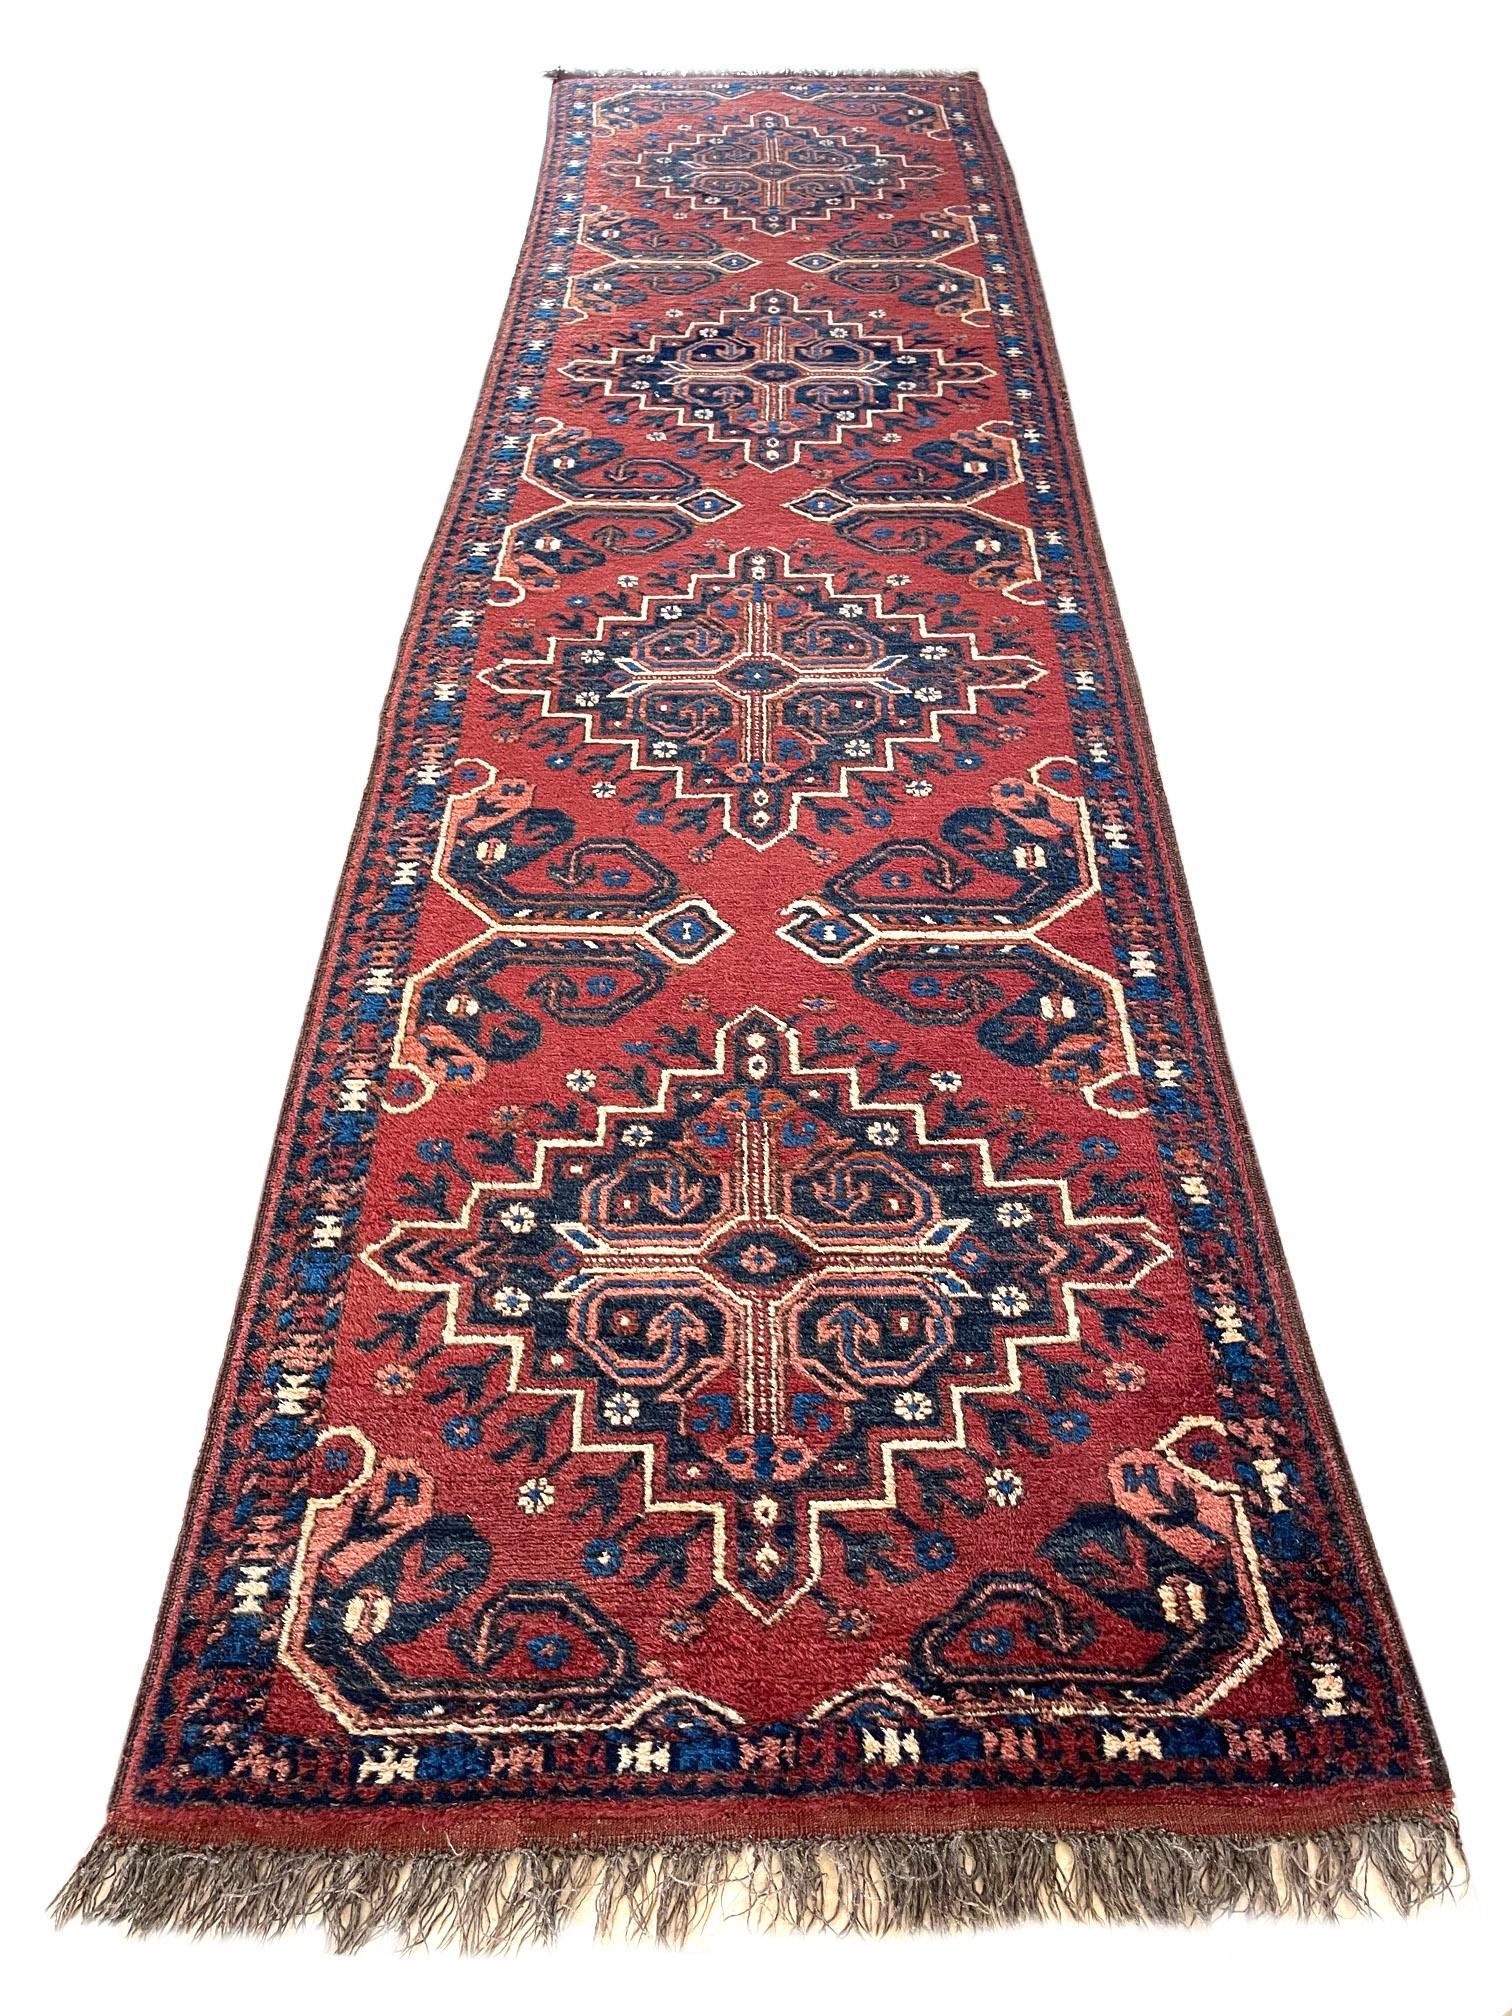 This runner is an Afghan rug which is a workshop carpet woven by a weaving house in Afghanistan. Afghanistan has a rich history in the craft of rug-making. The design in this piece is tribal with repeated medallion. Rich rust color with cream and